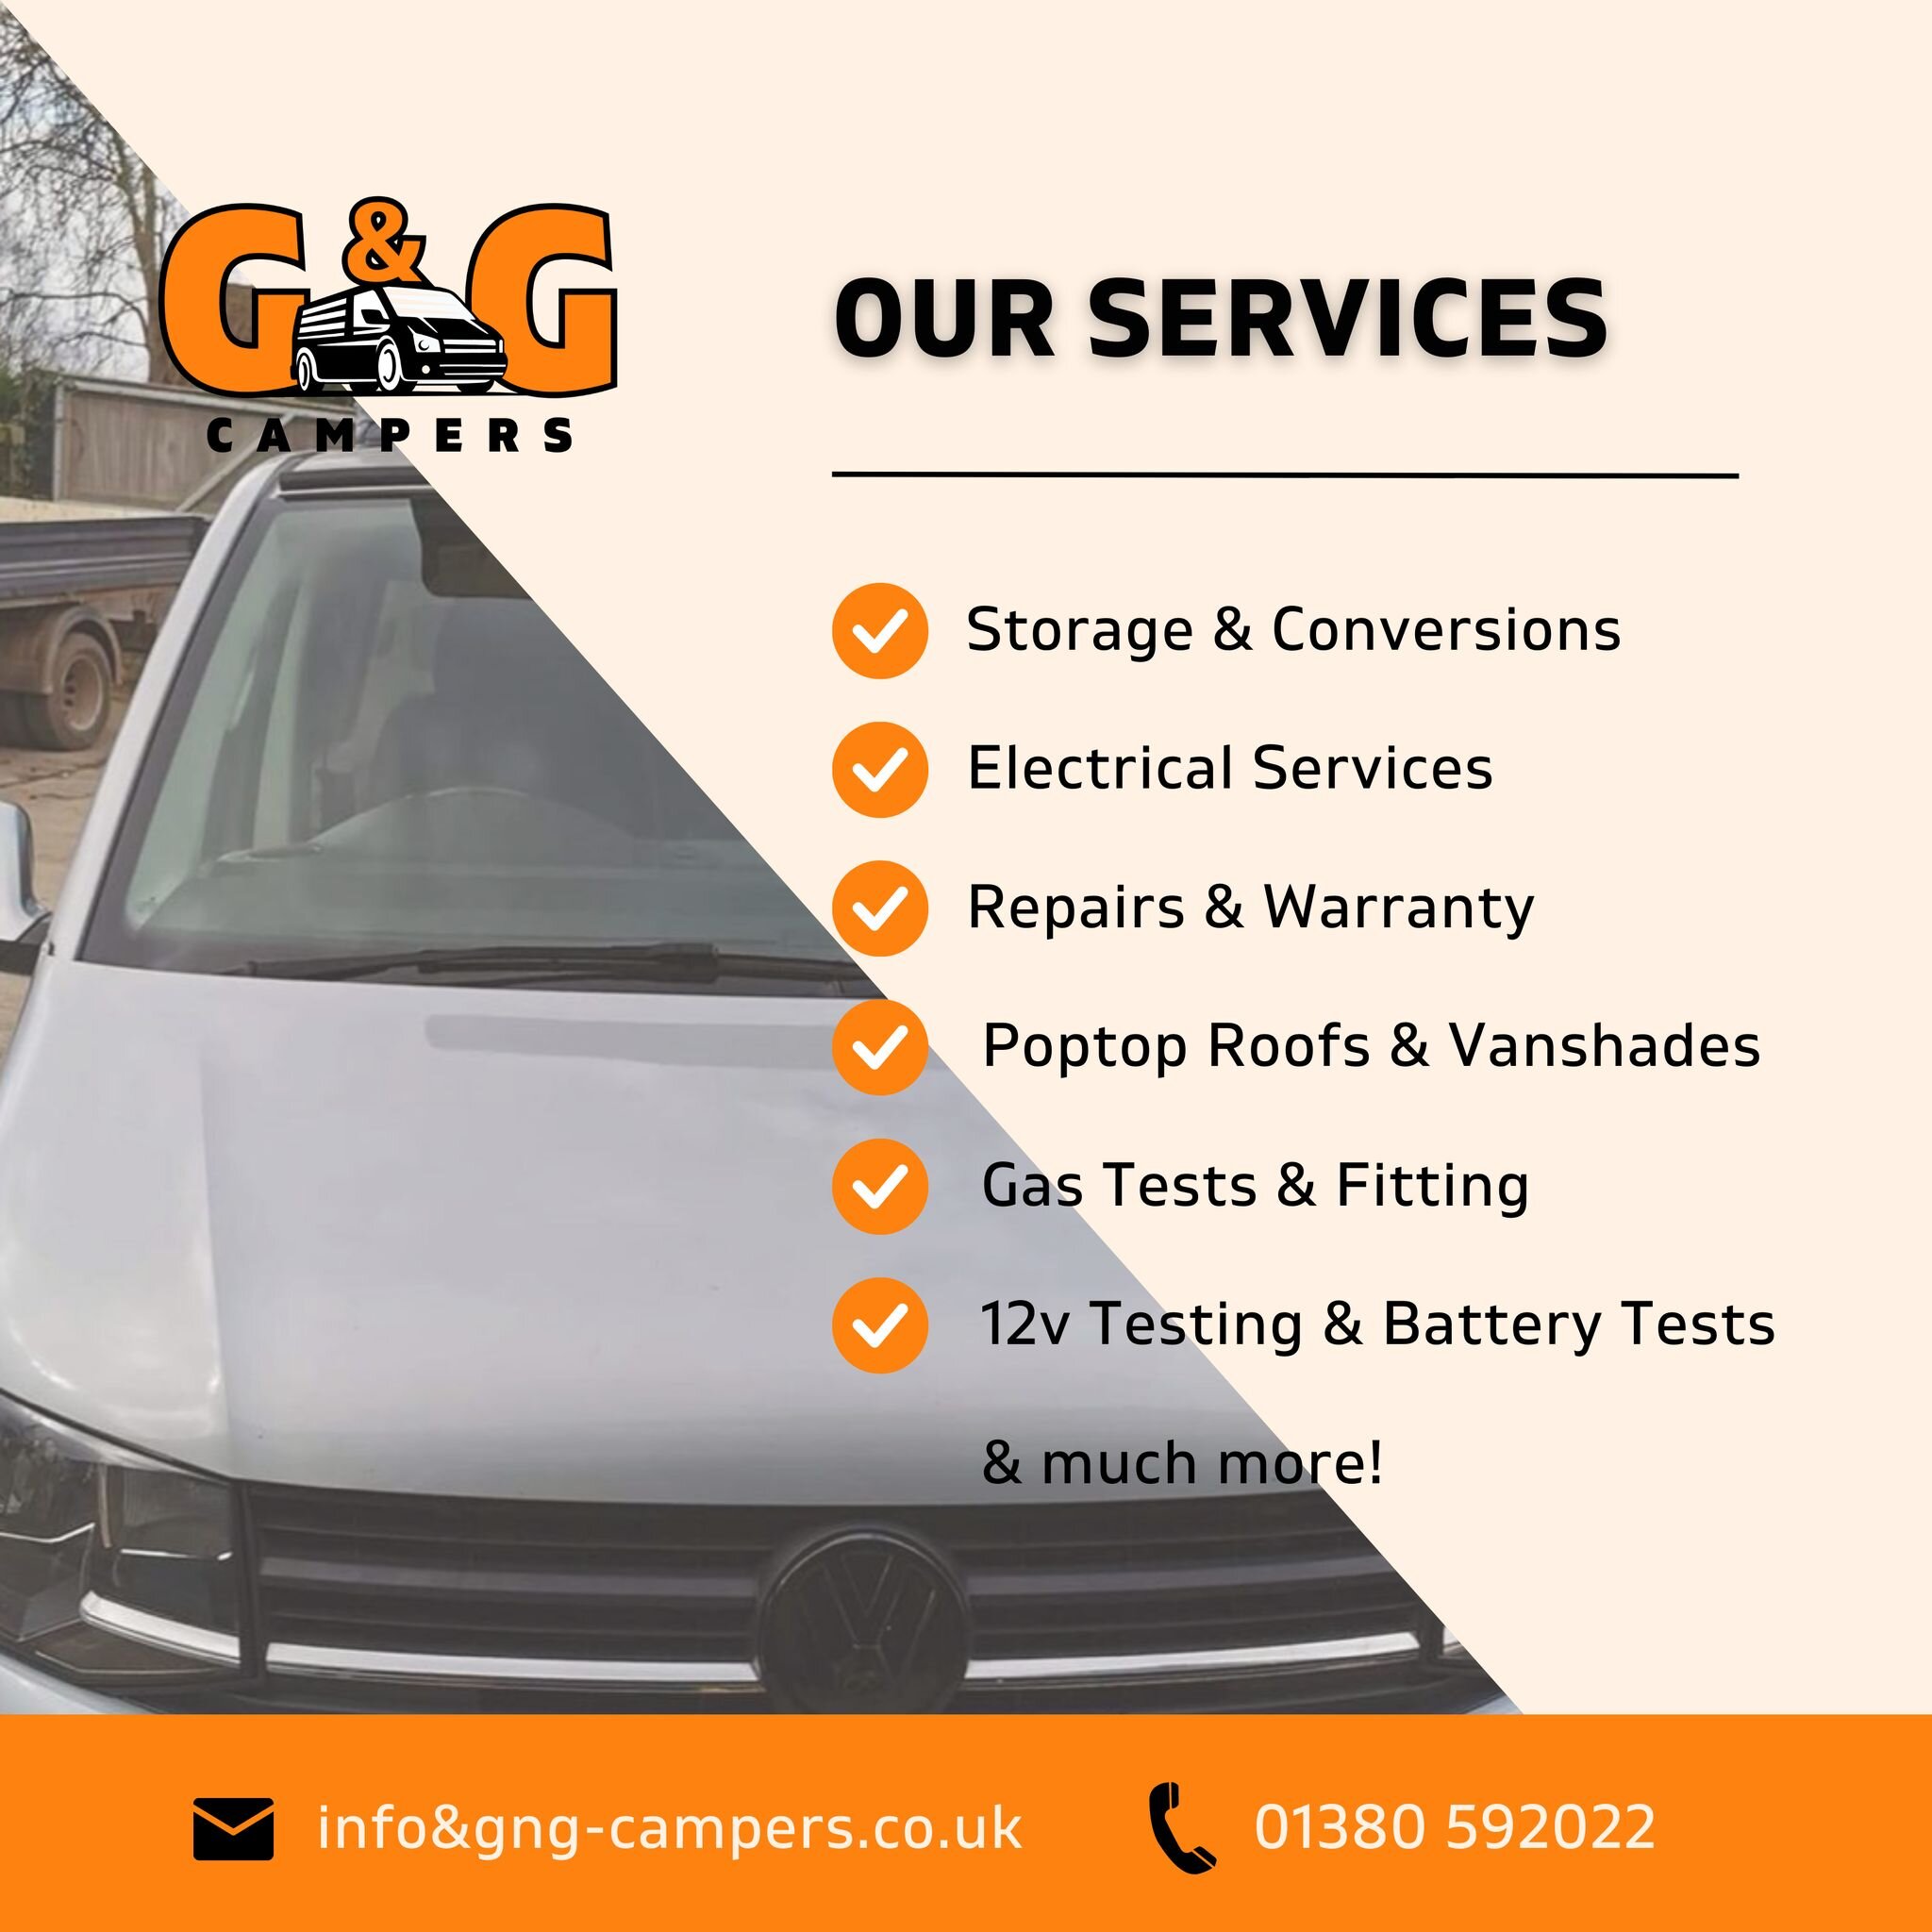 If you in need of any repairs, maintenance or fitting services, get in touch today 📲

There's a huge range of services that we offer, check out our stories for more information 🌟

📞 01380 592022
📧 info@gng-campers.co.uk
💻 New website coming soon